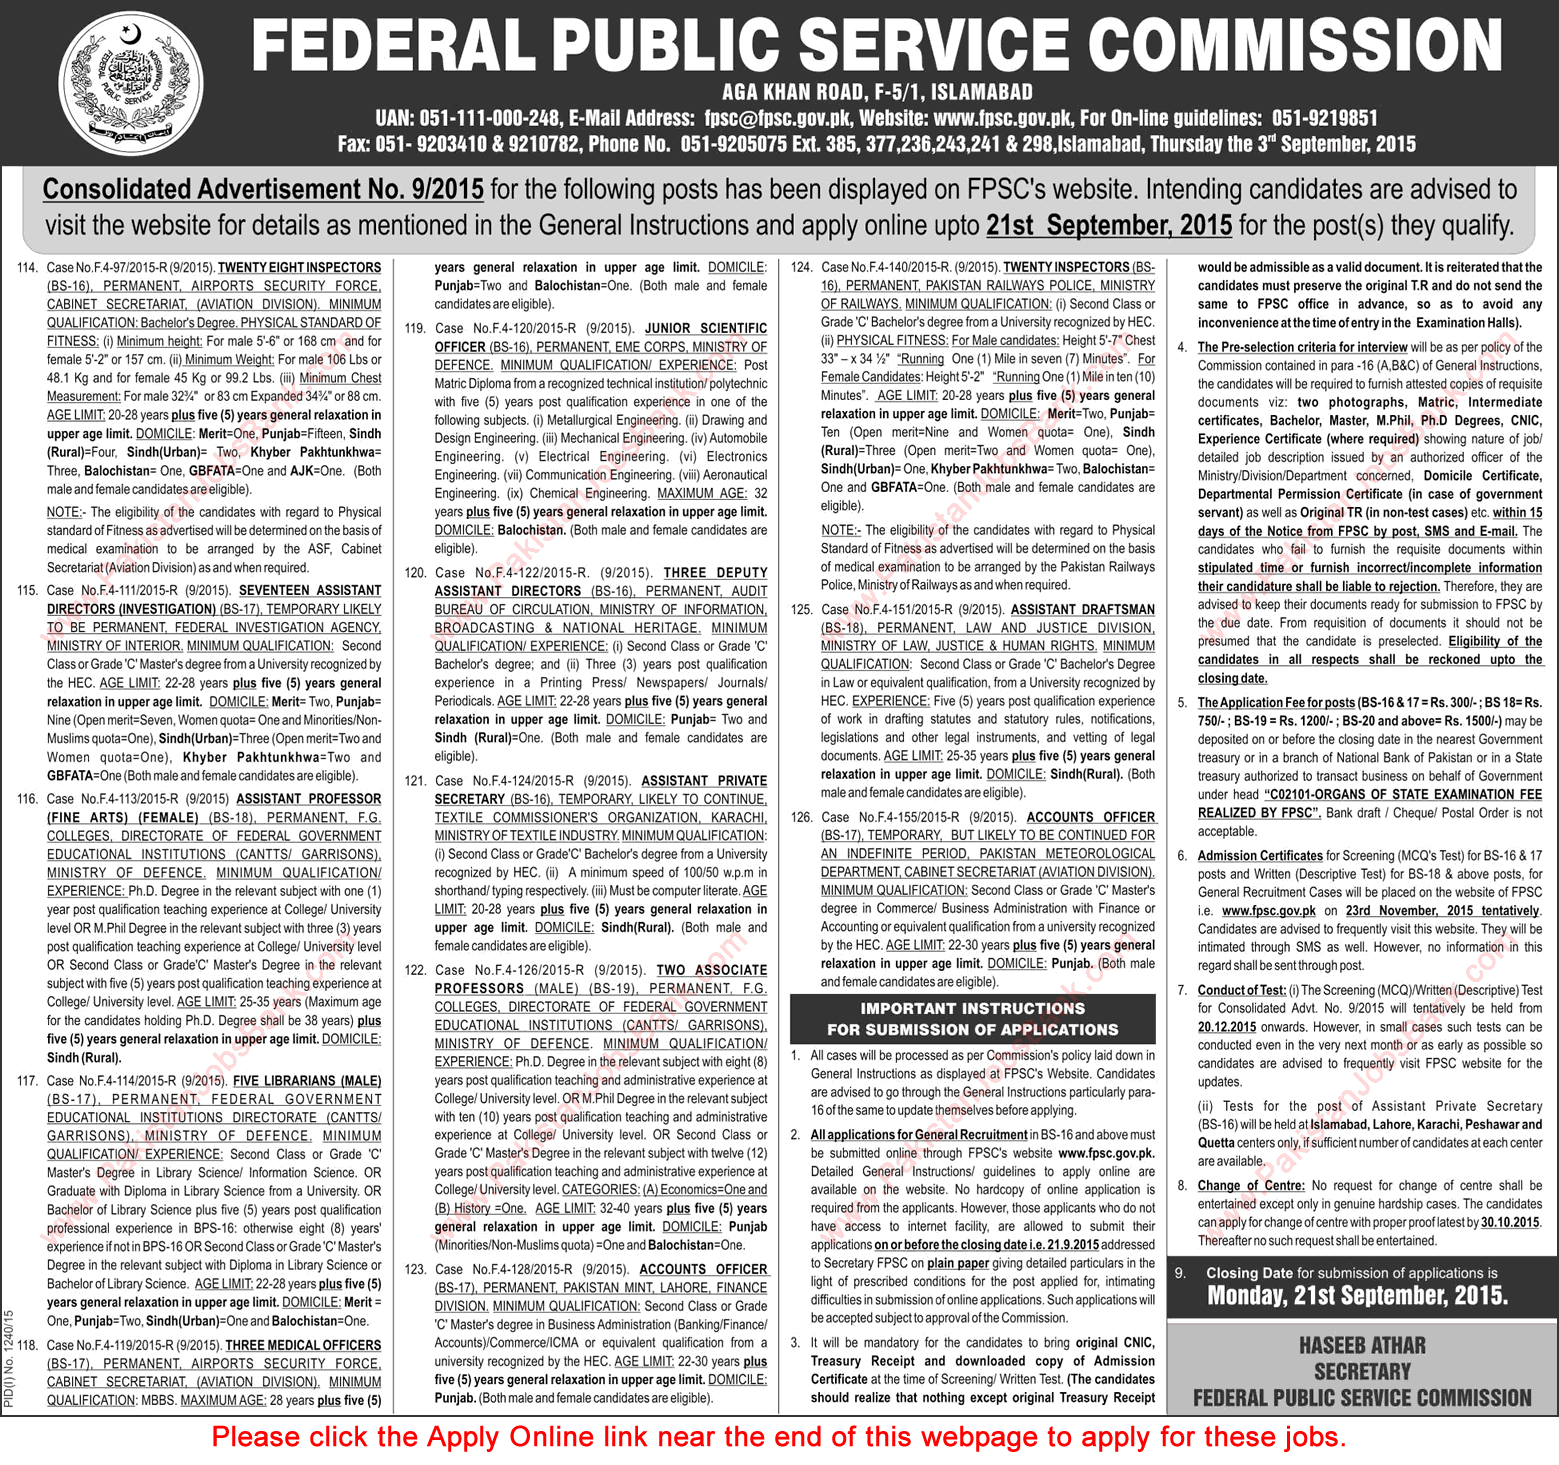 FPSC Jobs September 2015 Online Apply Consolidated Advertisement No 9/215 (09/2015) Latest